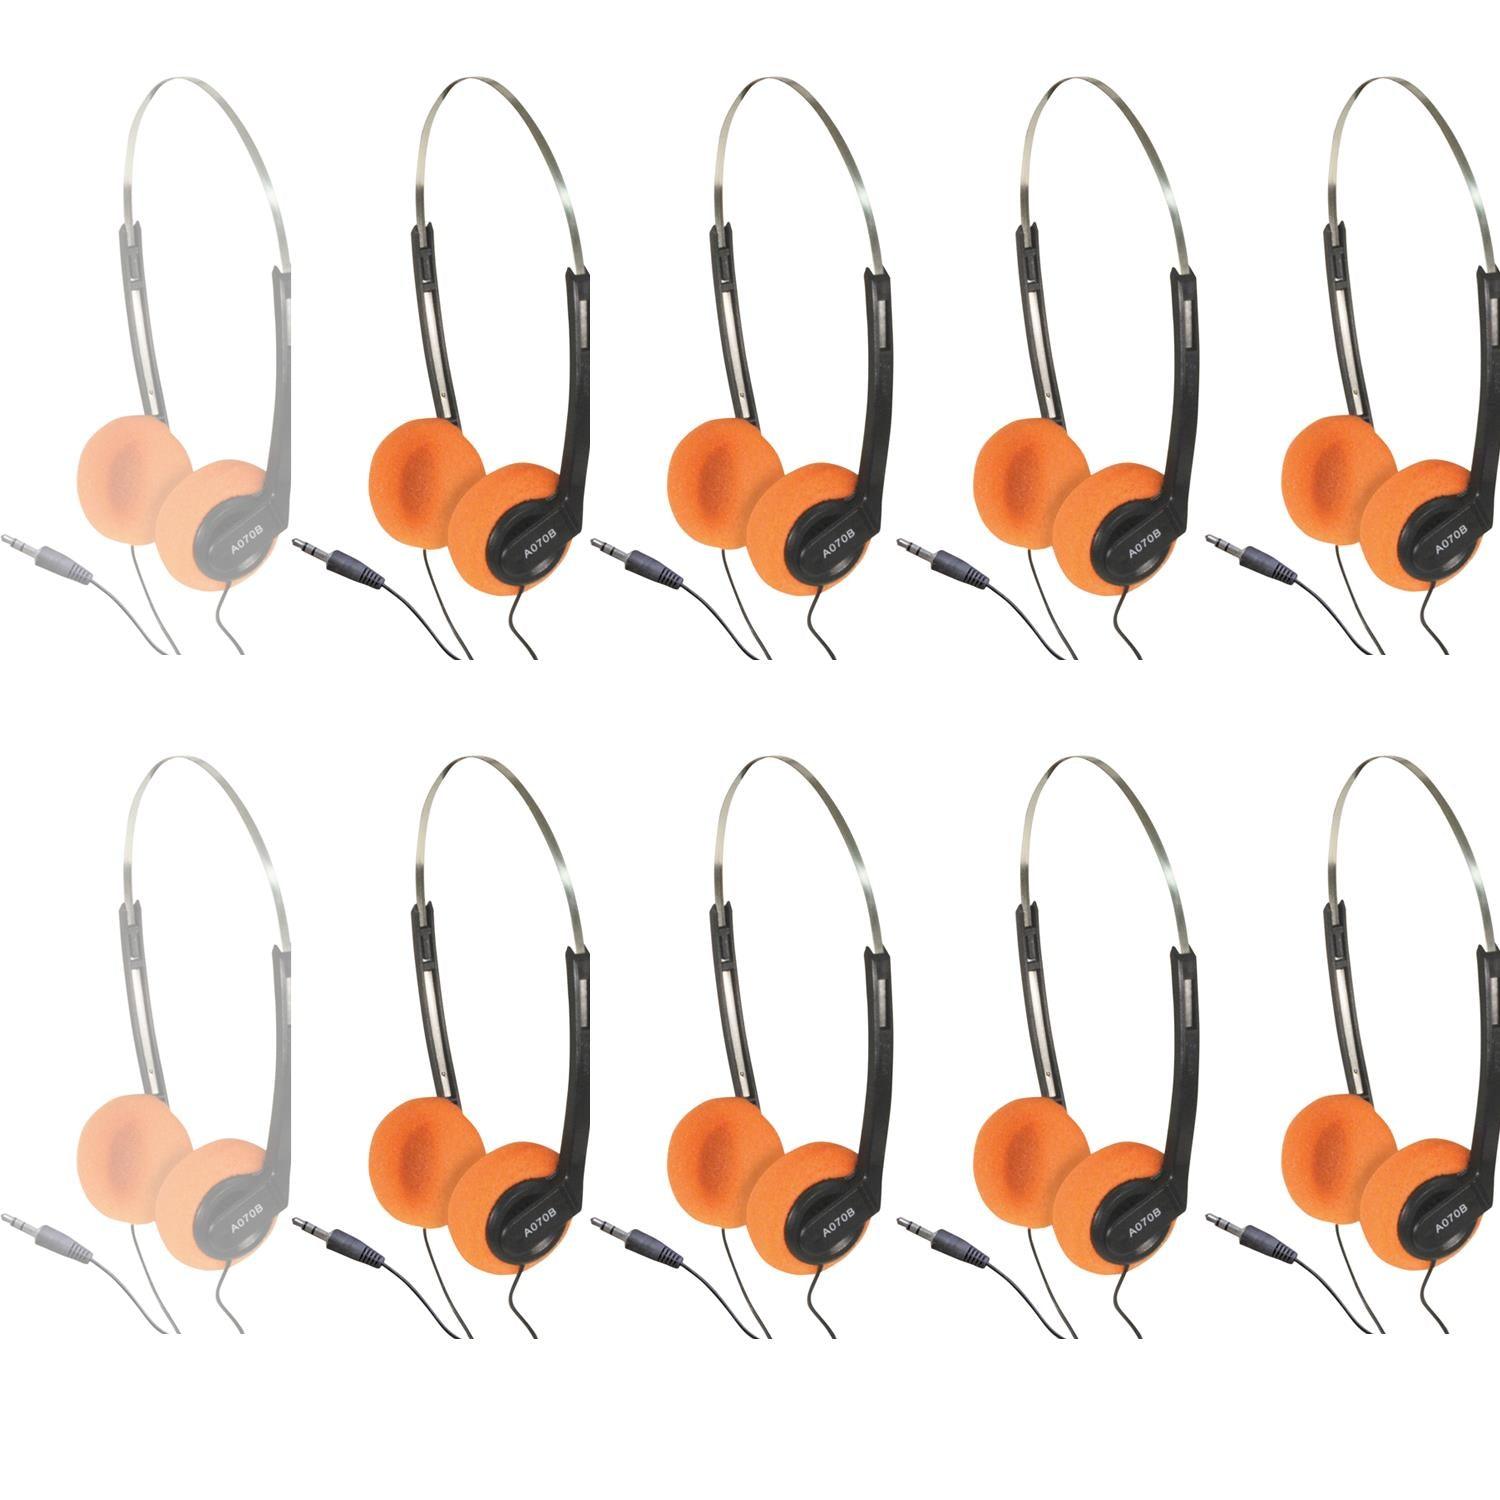 10 x Soundlab Lightweight Stereo Headphones with Orange Pads - DY Pro Audio